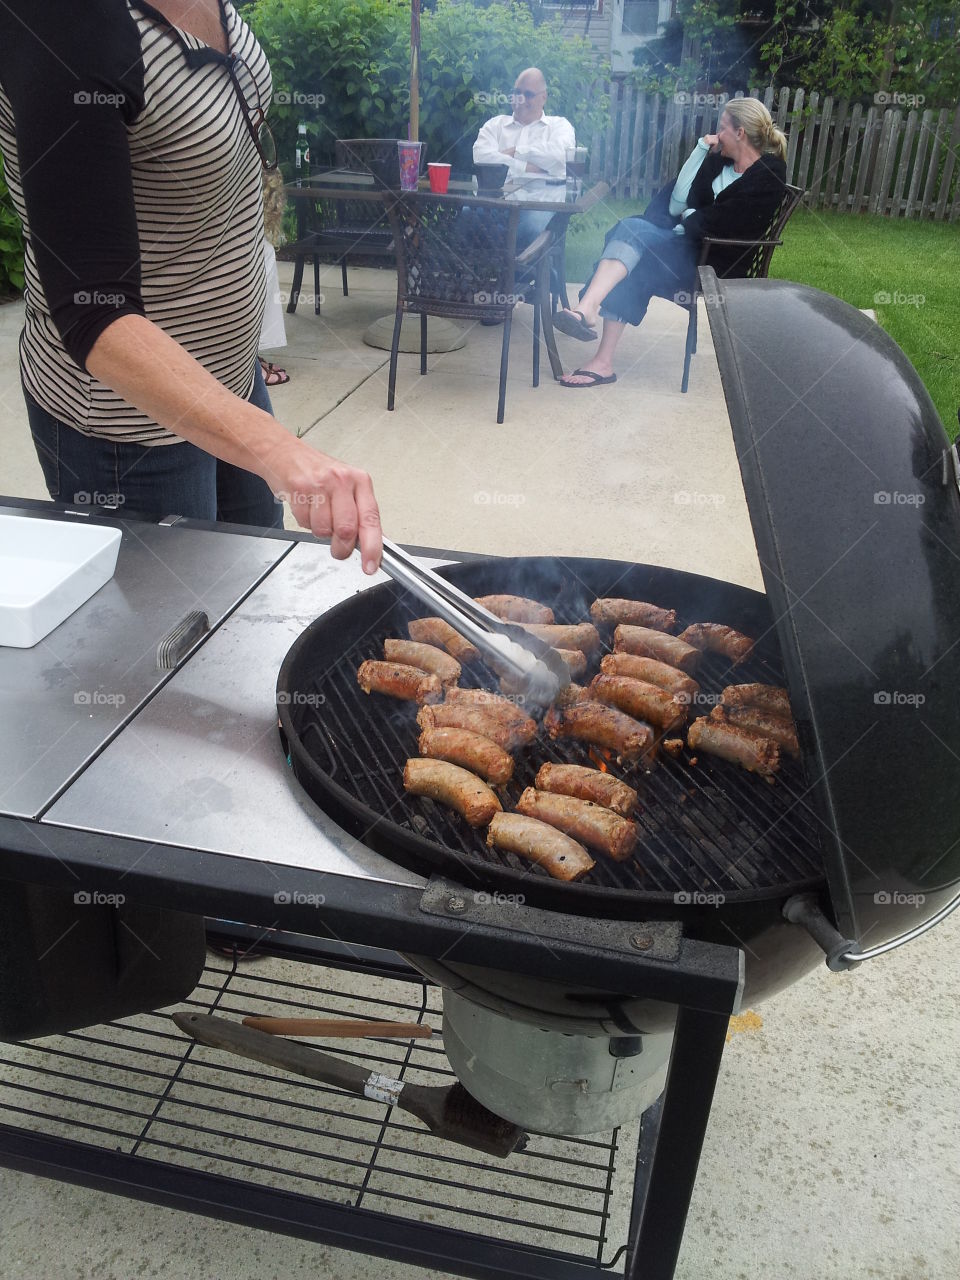 Grilling some sausages